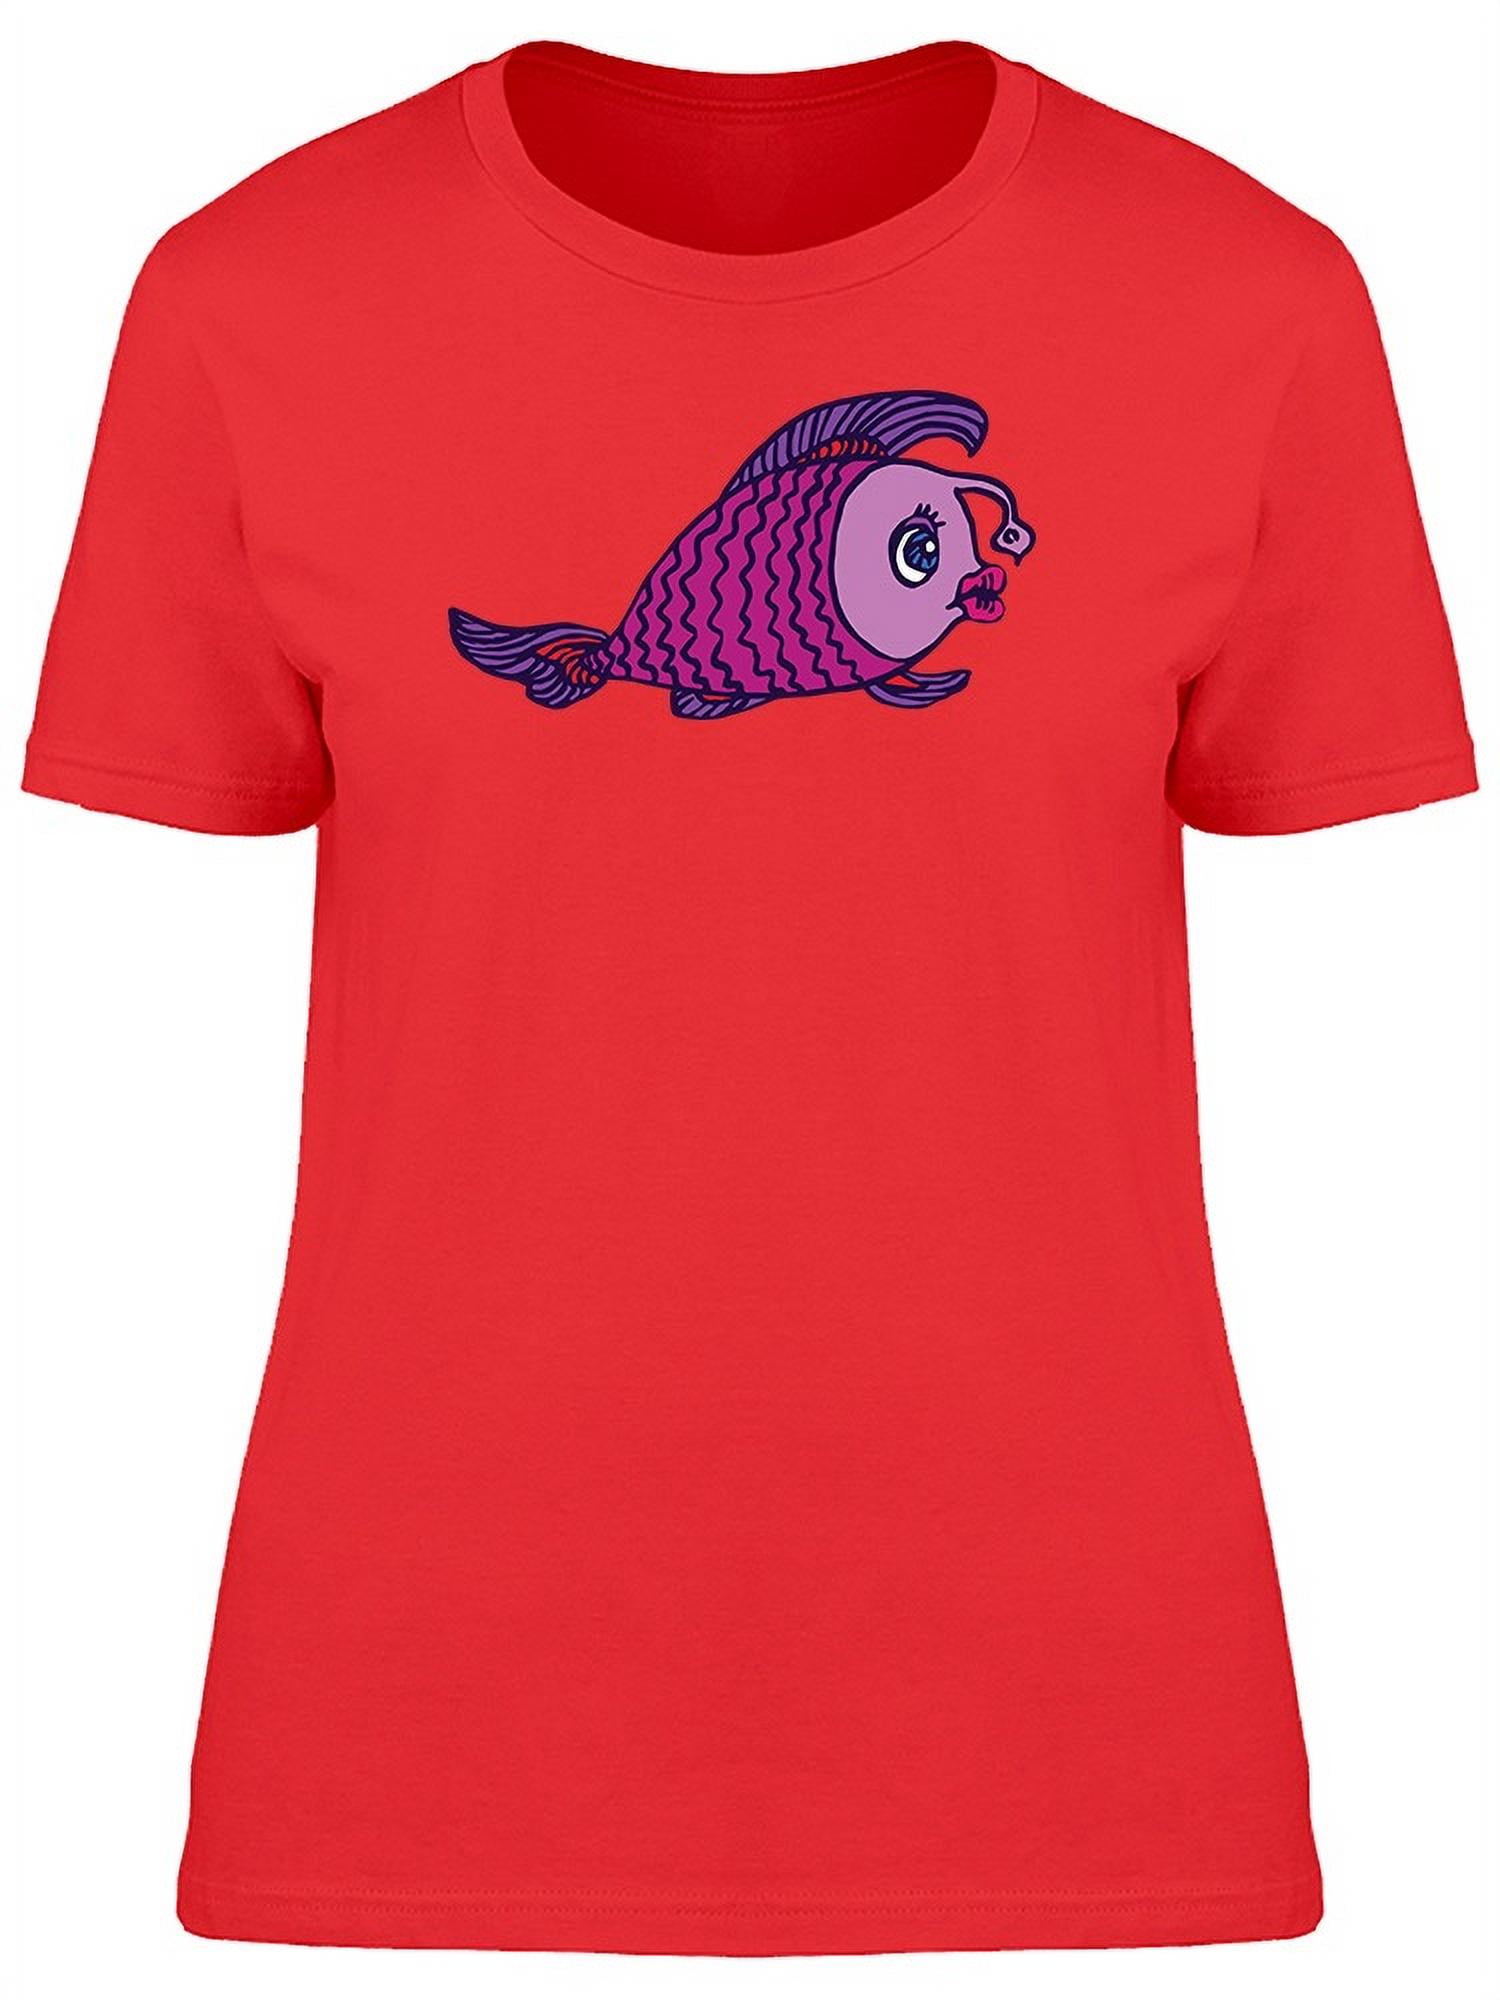 Cute Angler Fish With Lips Tee Women's -Image by Shutterstock 